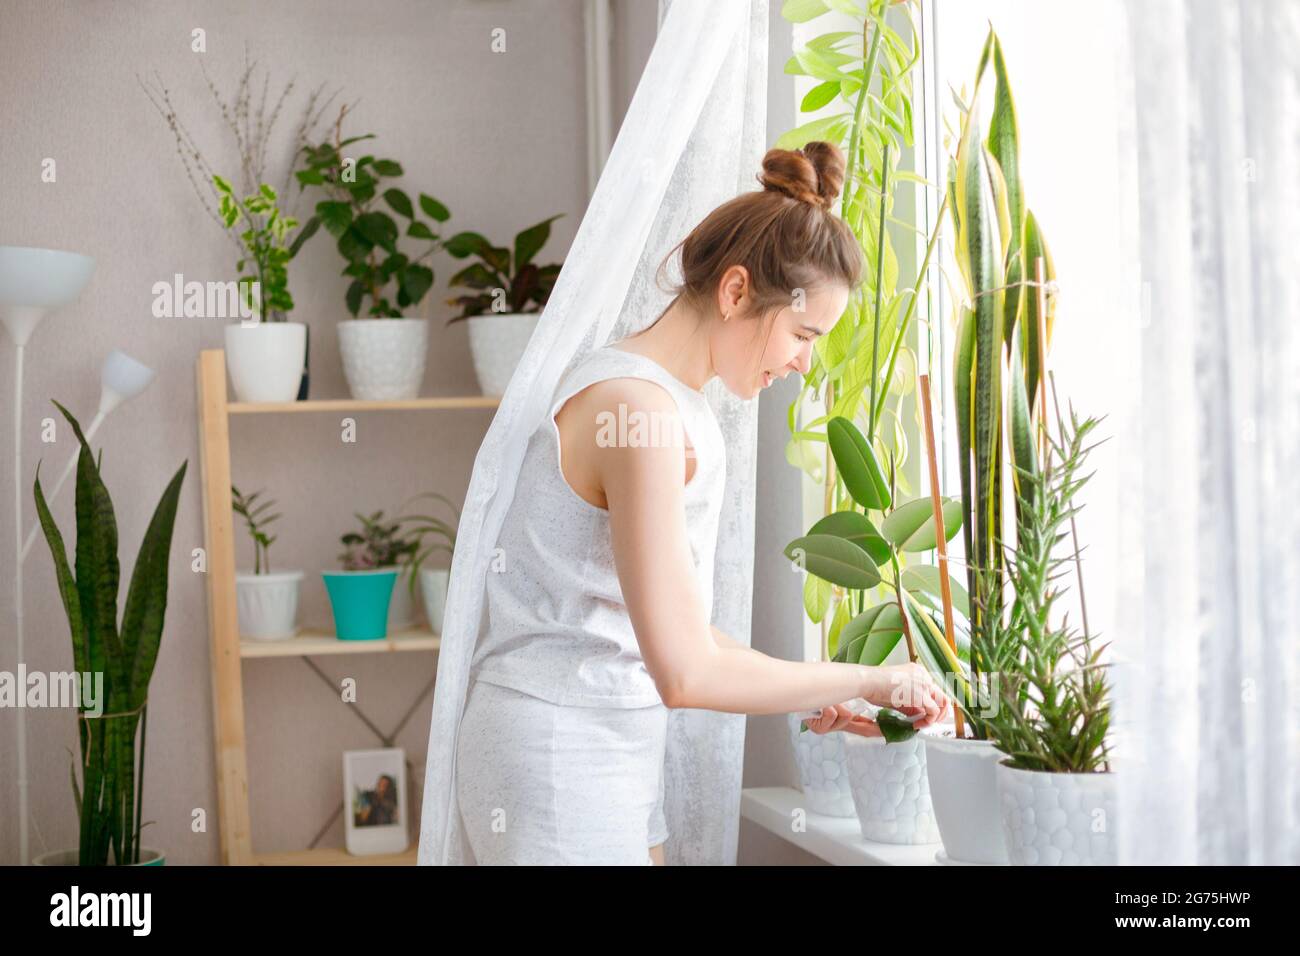 Young female with braids smiling and taking care of potted plants while gardening in weekend at home Stock Photo